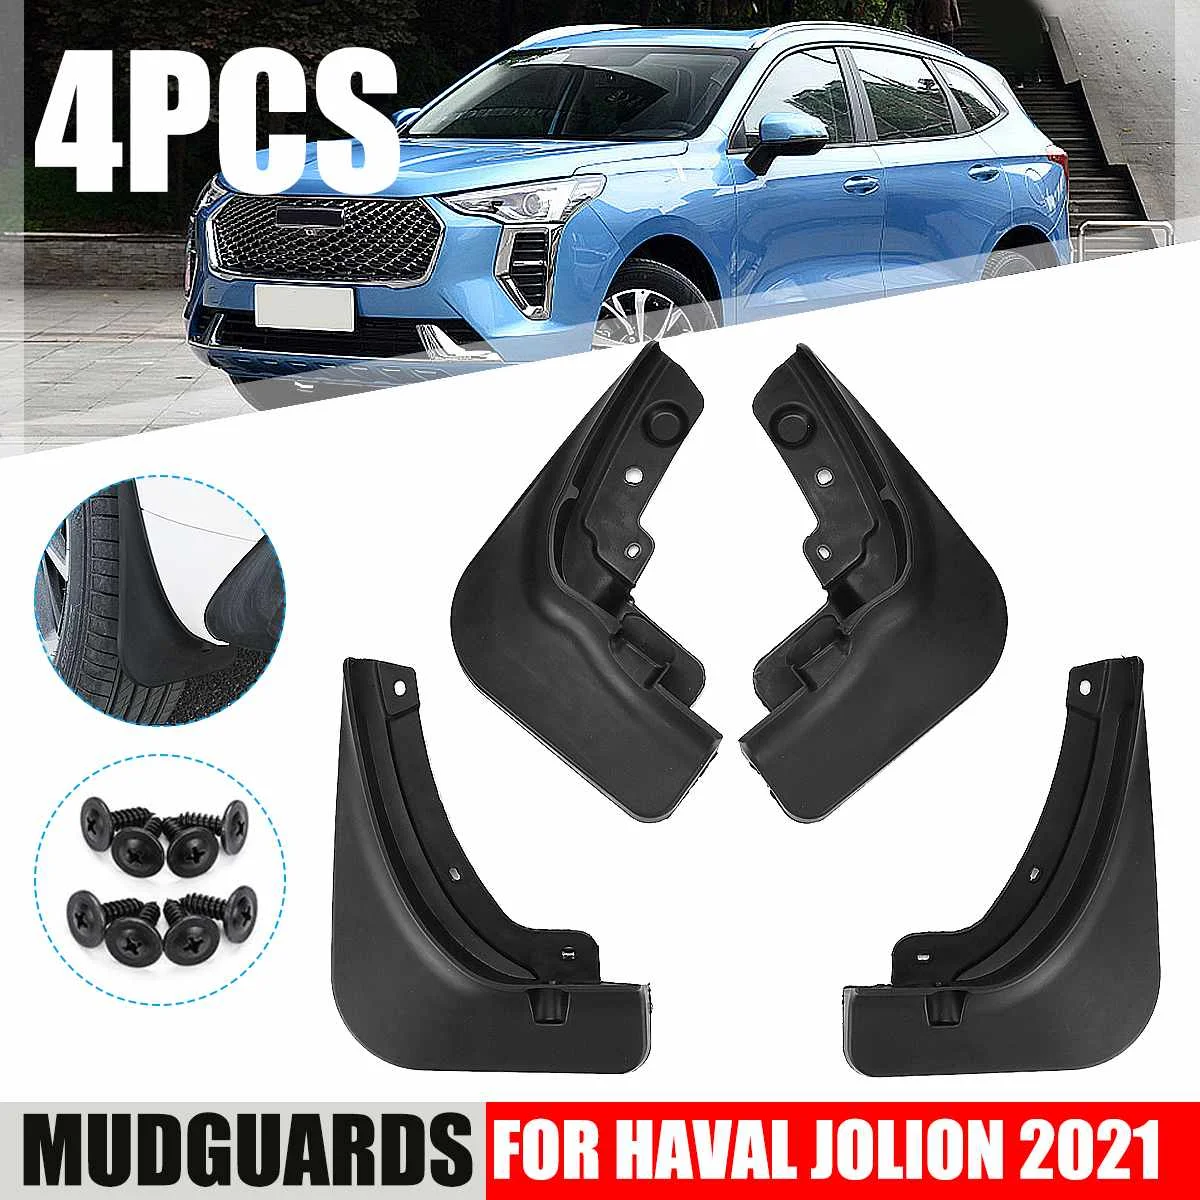 

Mudguards For Haval Jolion 2021 Car Fender Cover Flares Splash Guard Mud Flaps Car-styling Mudflaps Car Accessories